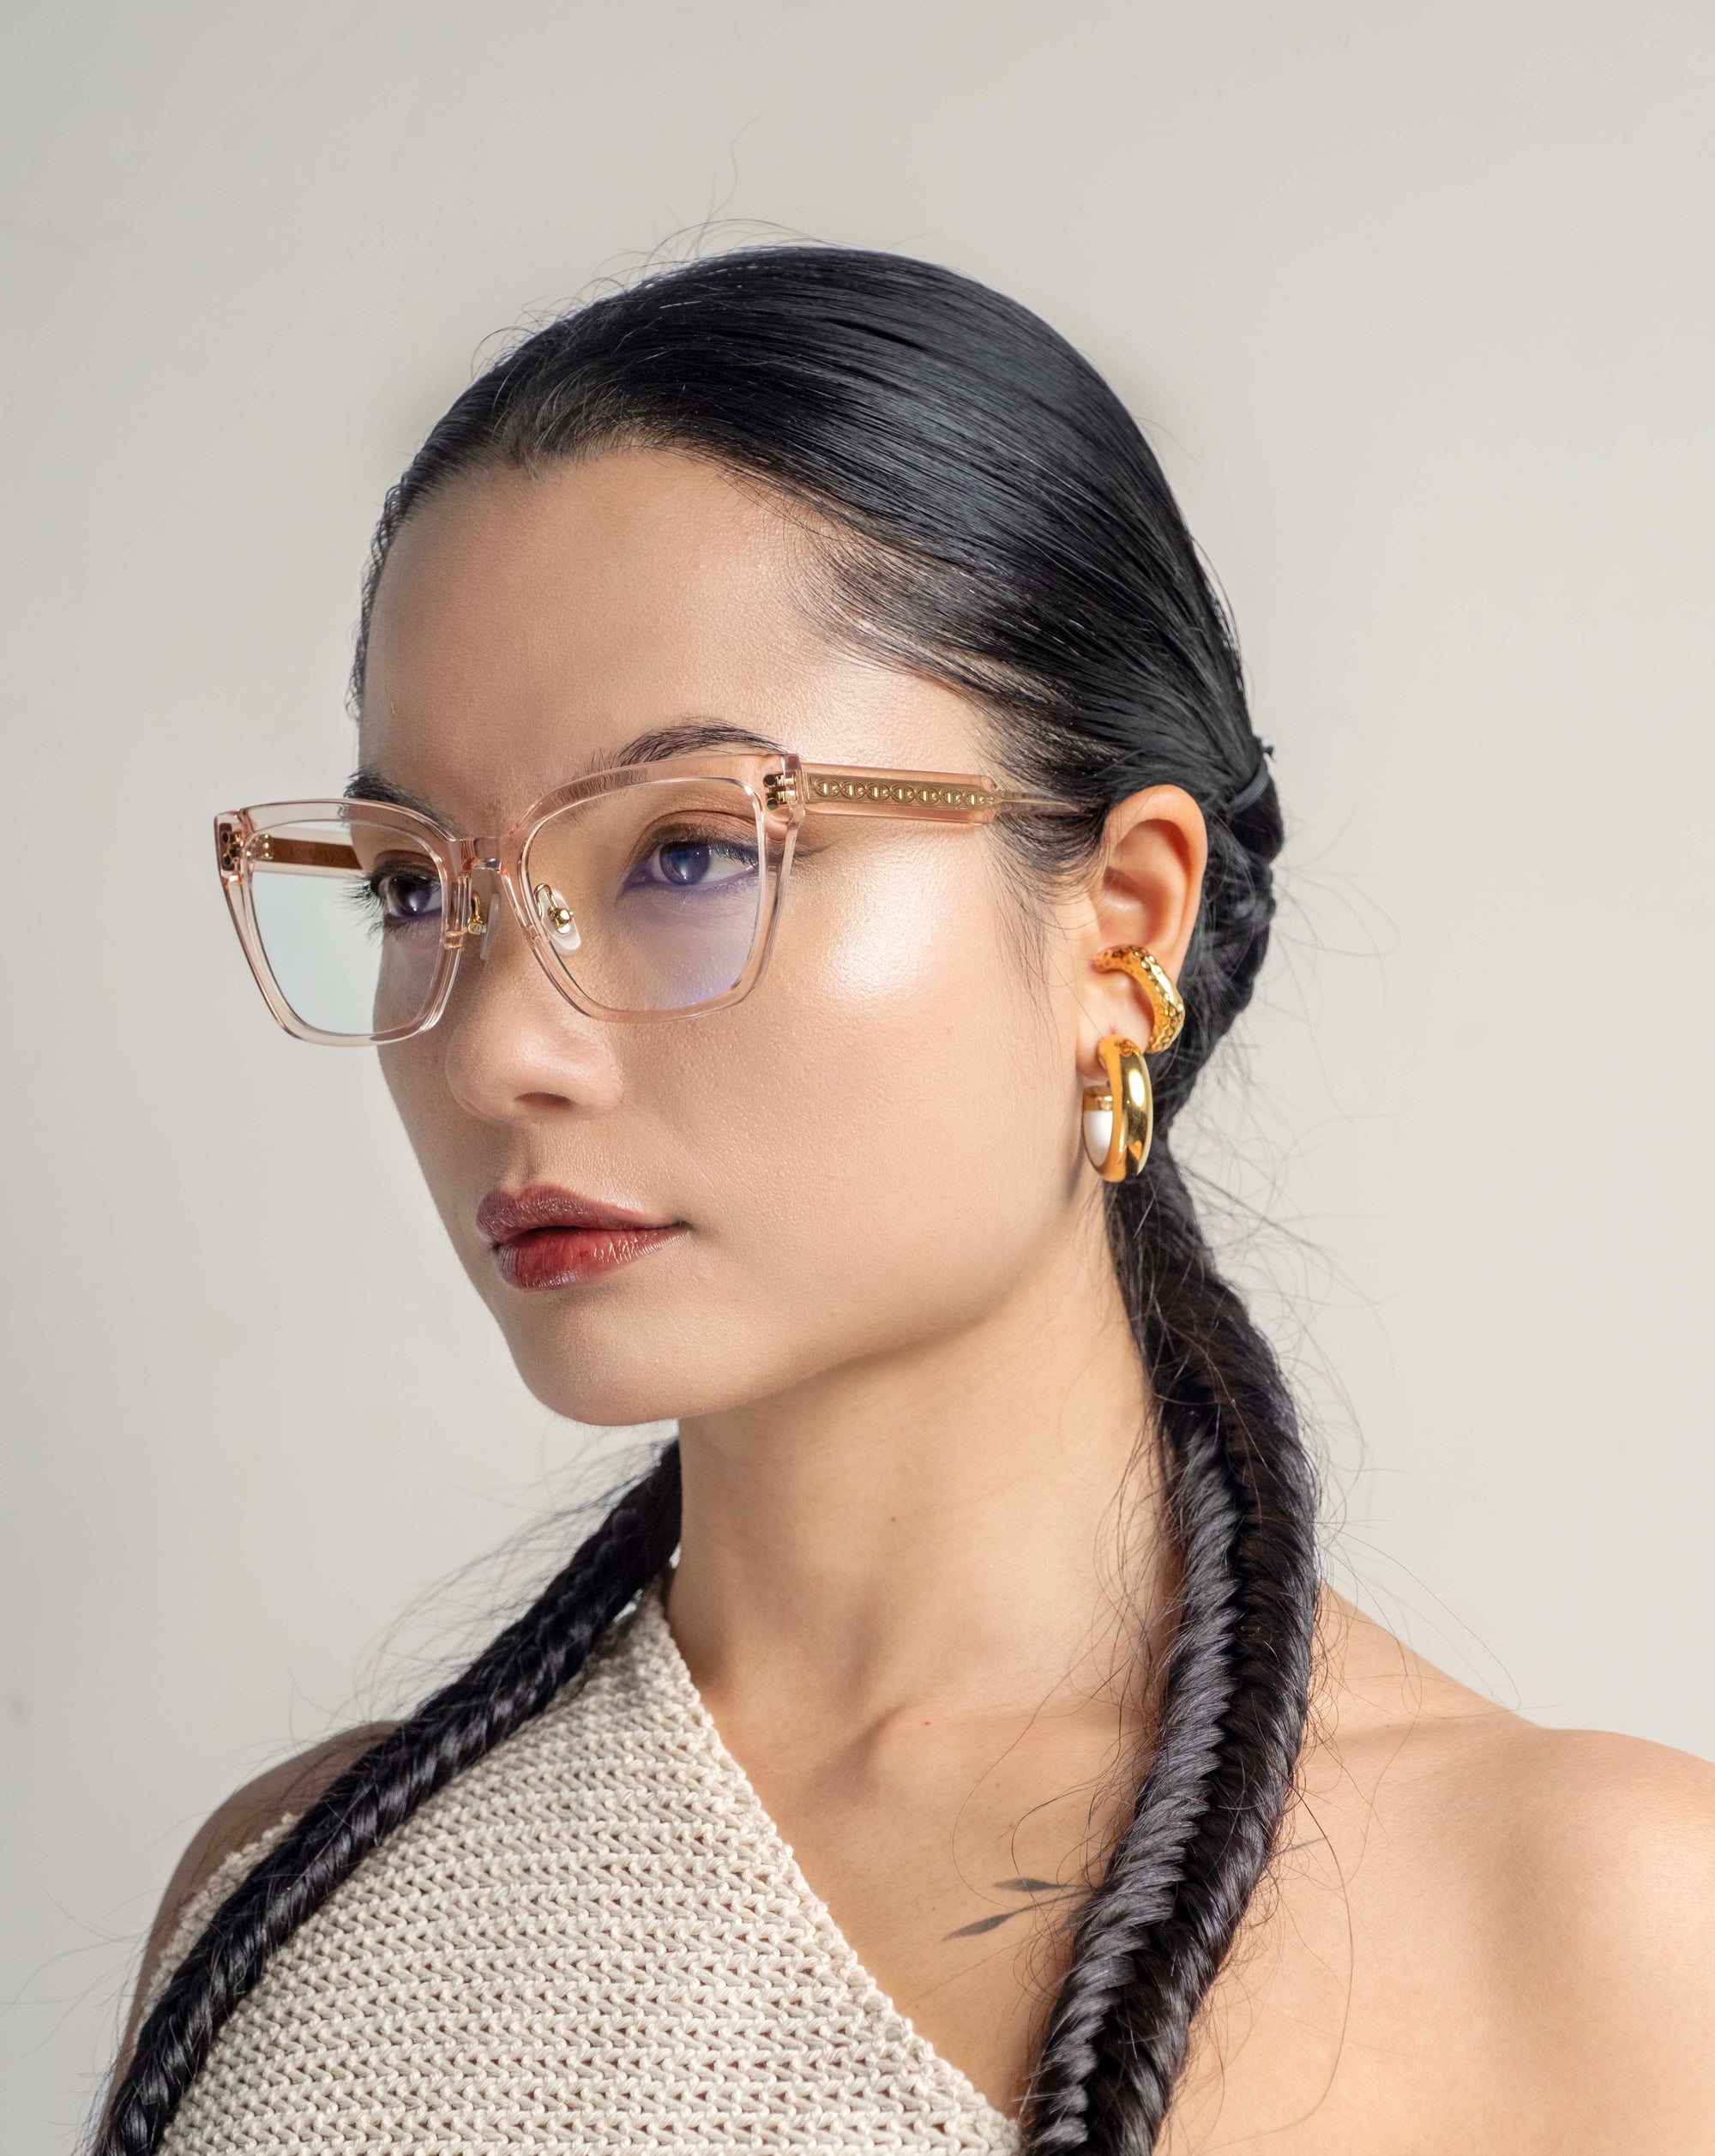 A person with long, dark braided hair is wearing square, translucent **Abbey** eyeglasses from **For Art&#39;s Sake®** and bold, gold hoop earrings. They are dressed in a textured, off-white, sleeveless garment with a subtle link-chain pattern against a plain background, giving a minimalist and sophisticated appearance.